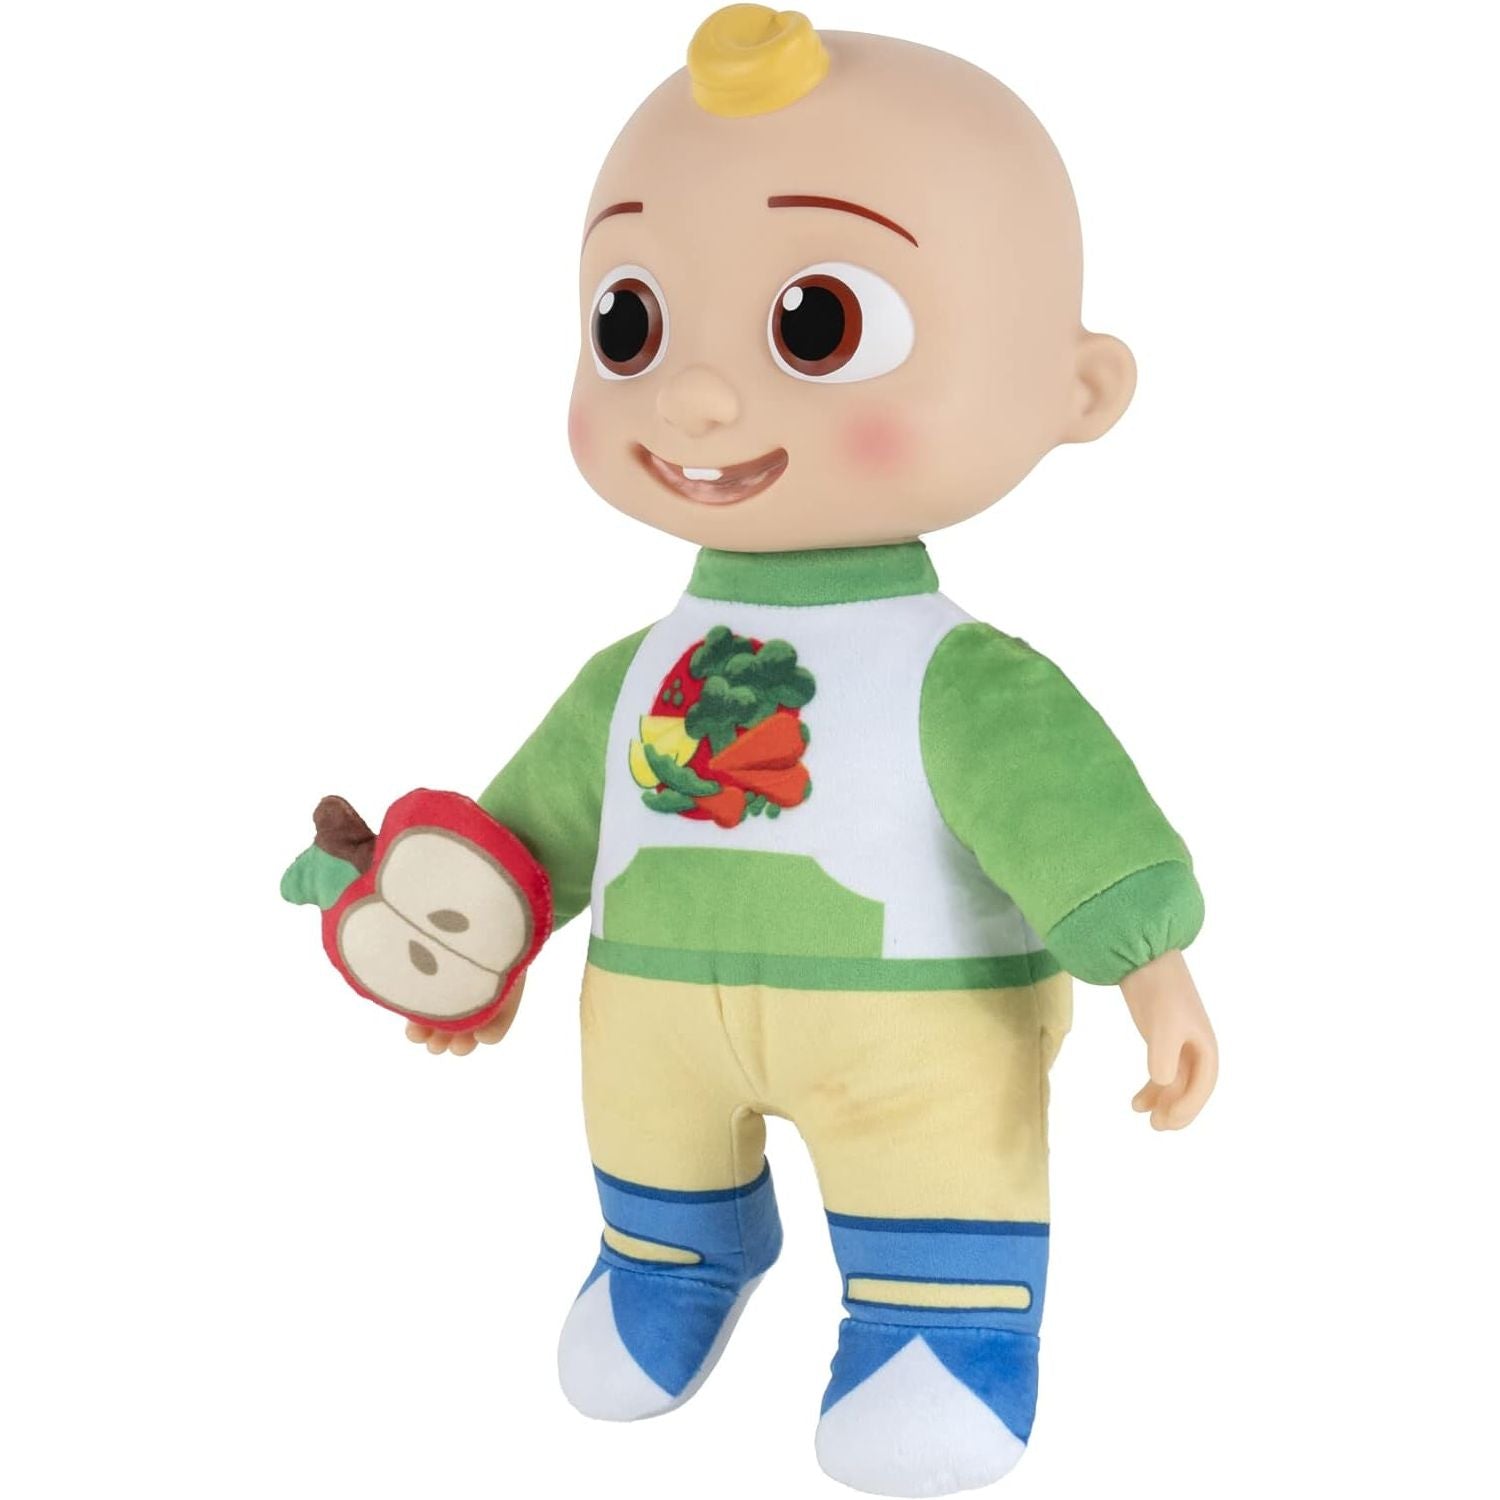 CoComelon Snack Time Features JJ Doll with Red Apple Plush - Plays Sounds, Phrases, and Clips of ‘Yes Yes Vegetables Song’